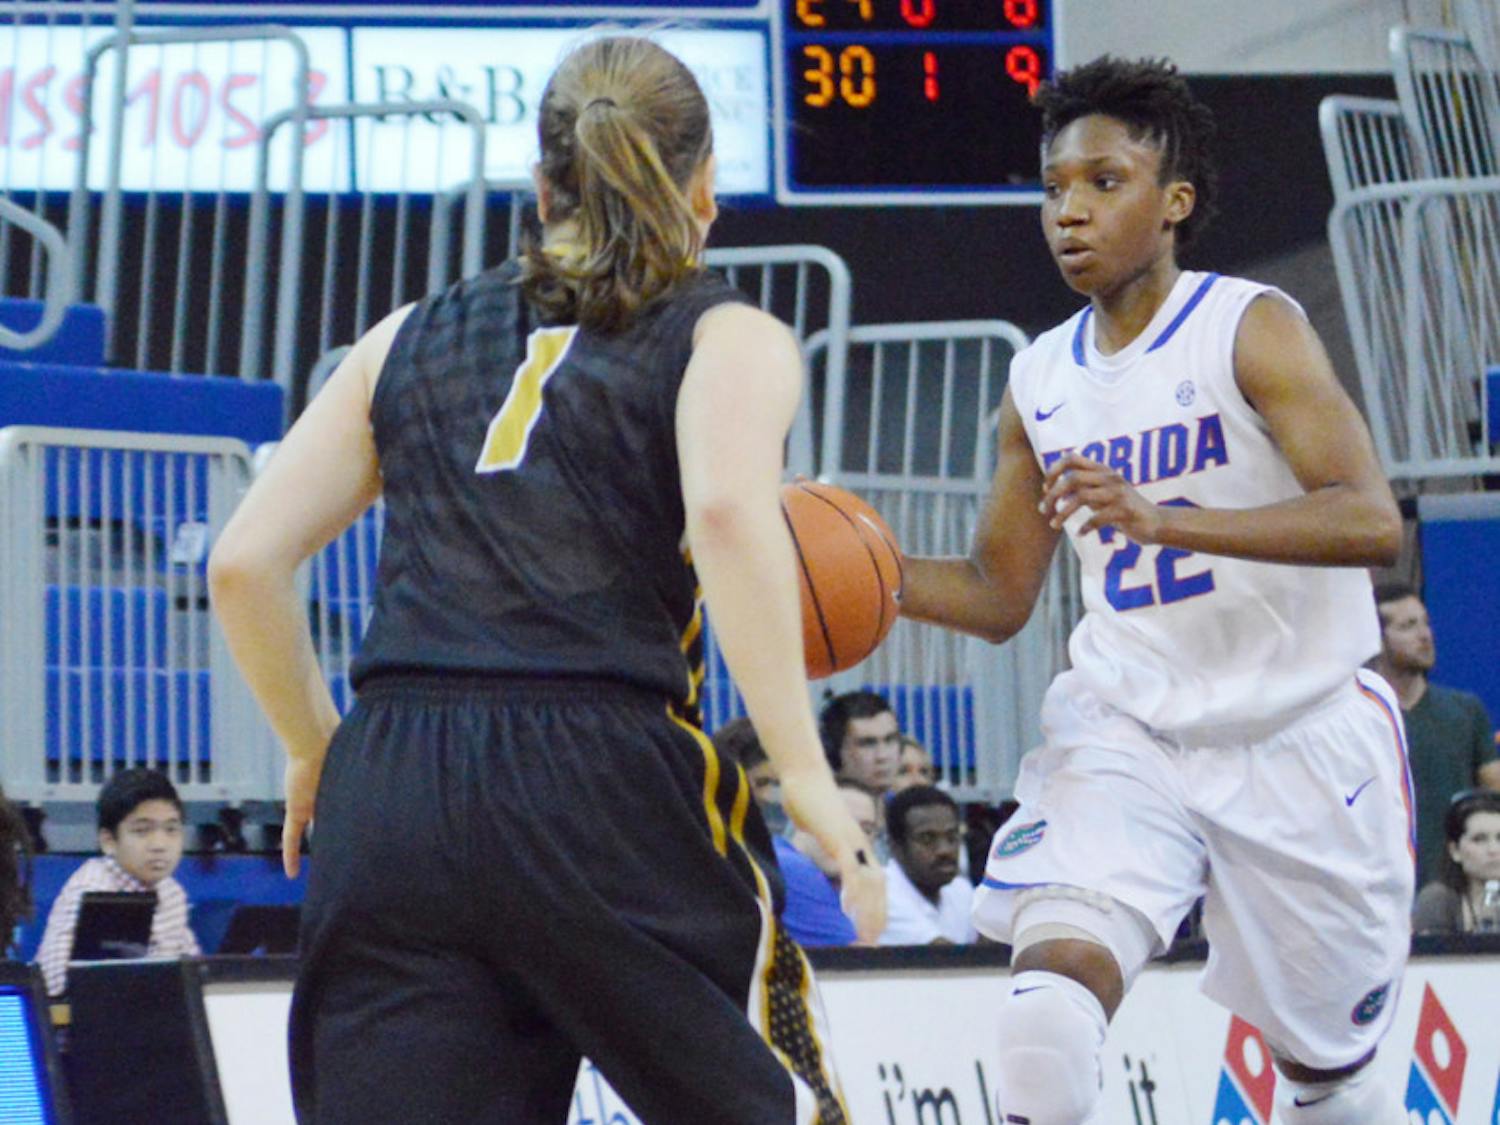 Kayla Lewis drives down the court during Florida’s 81-76 loss against Missouri on Feb. 20 in the O’Connell Center.